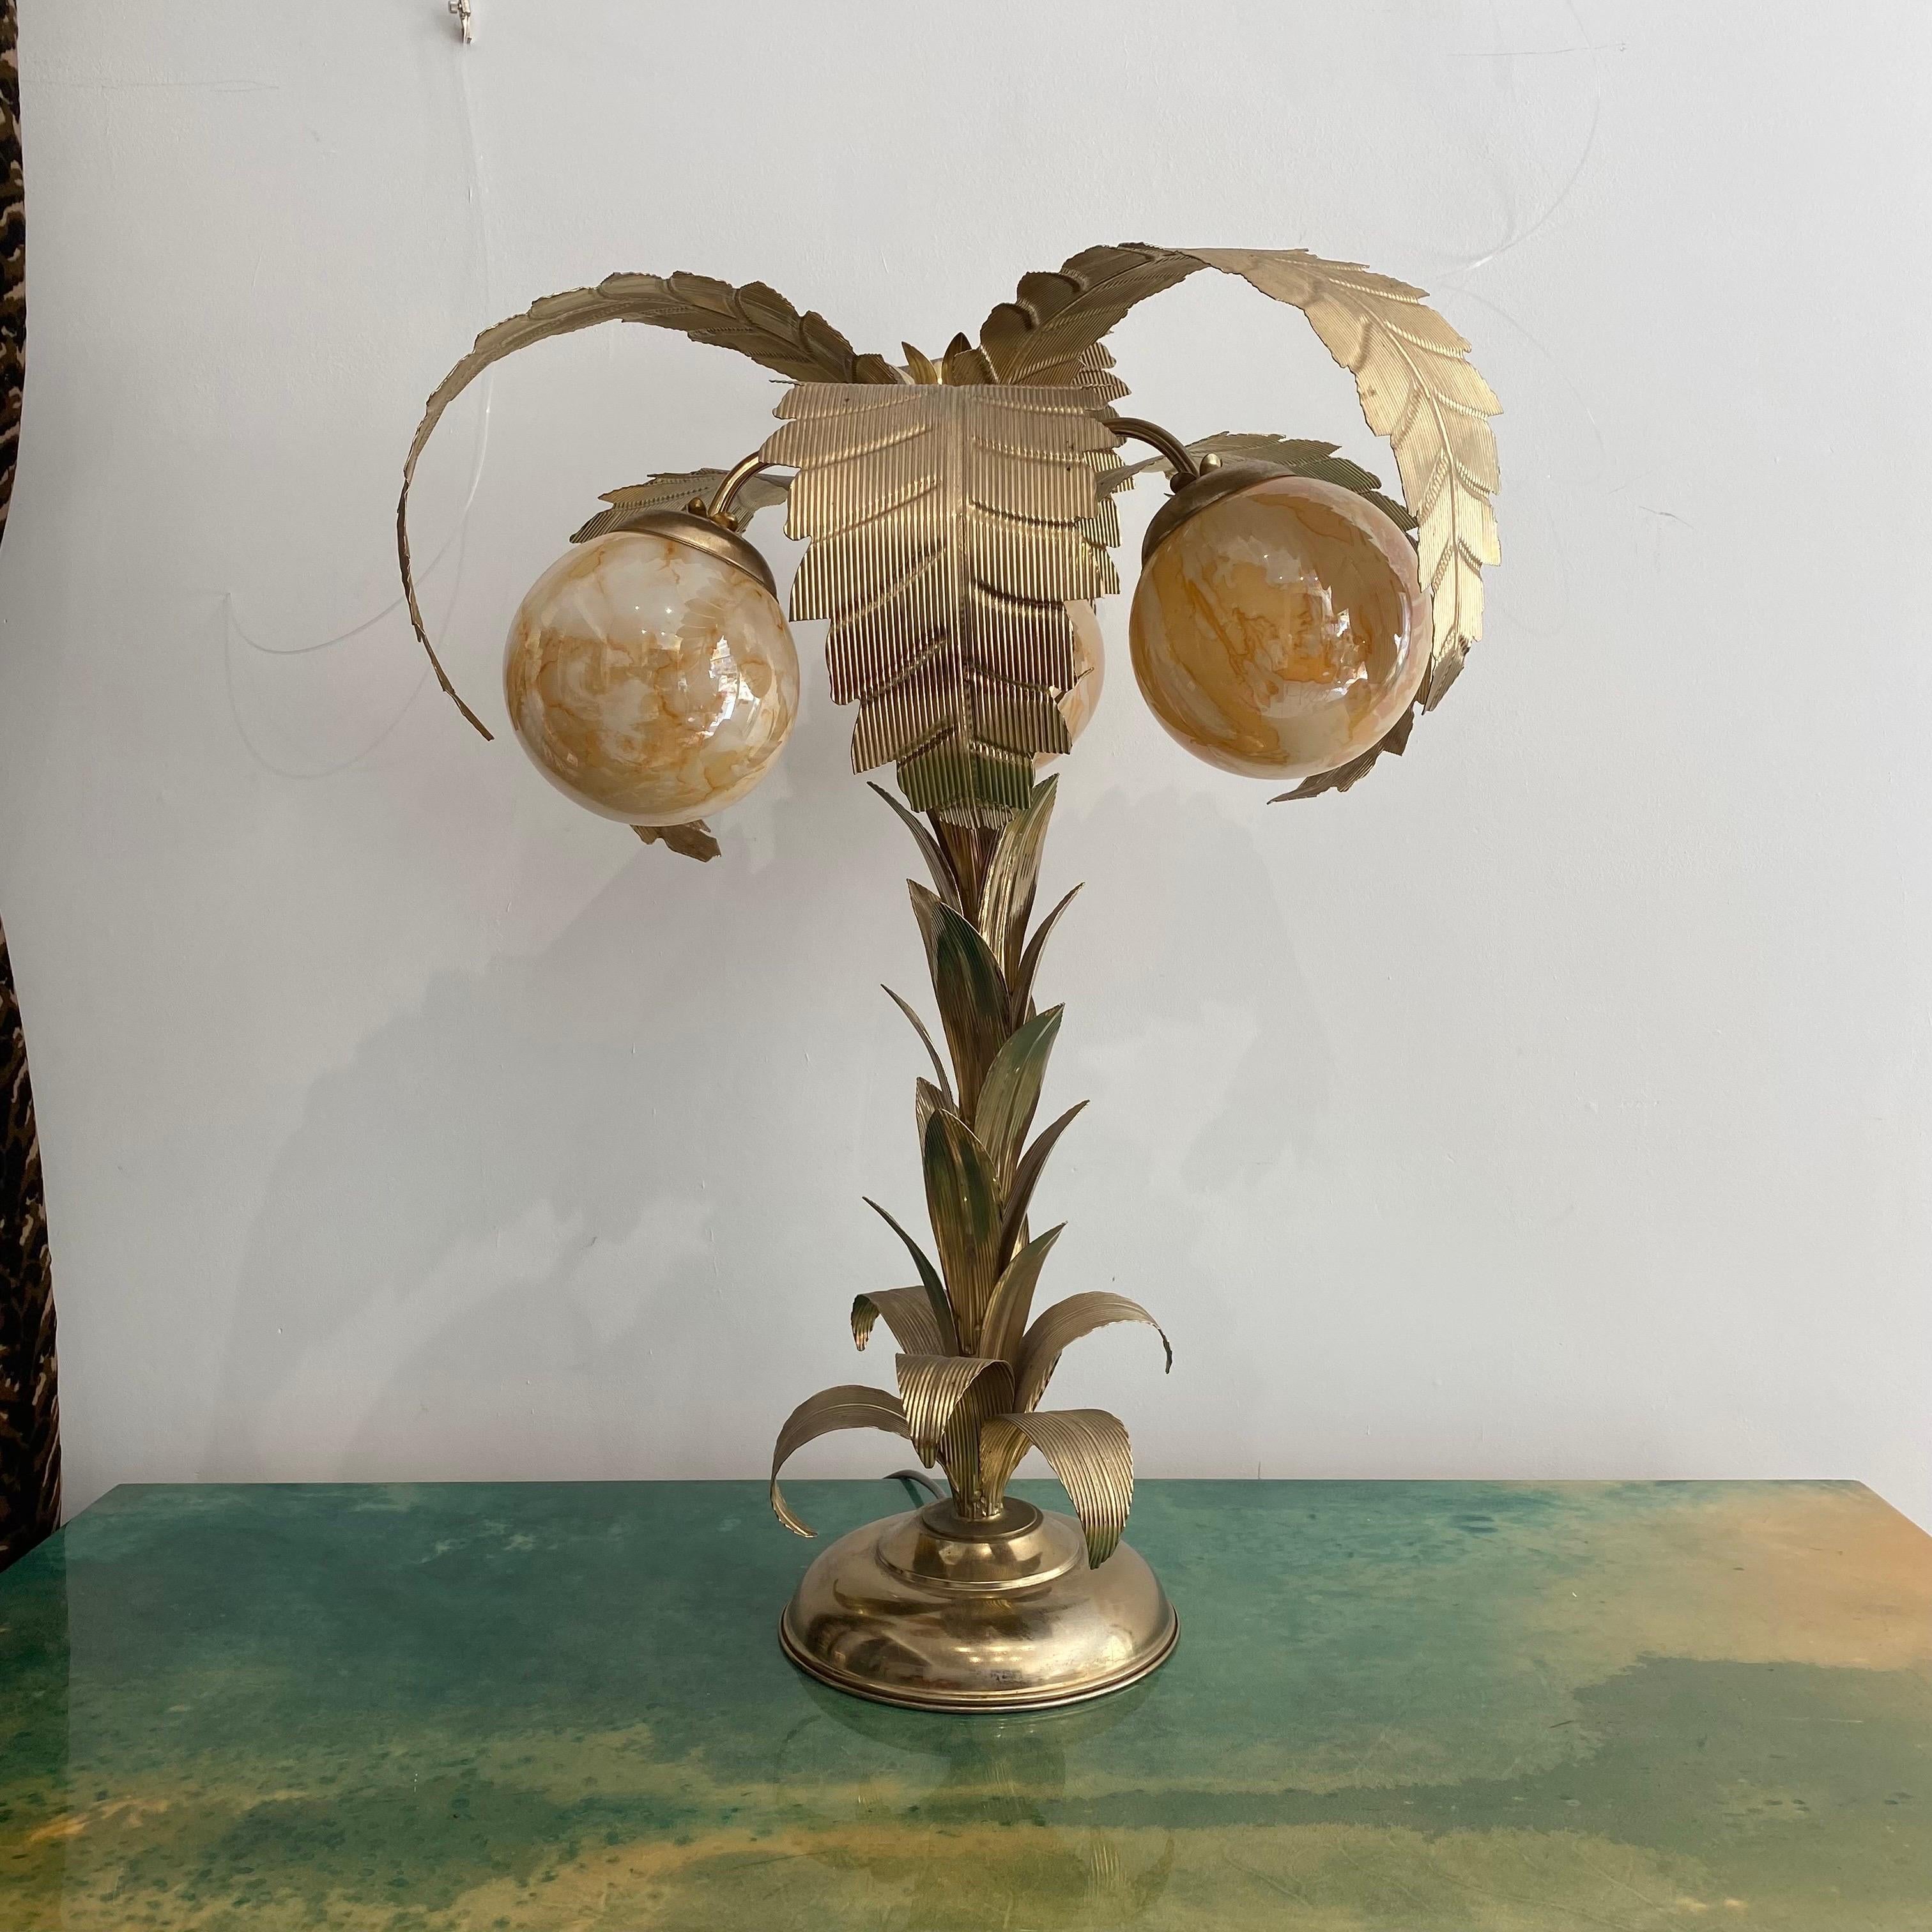 French 1970s Brass Palm Tree Table Lamp Hollywood Regency Art Deco #2 Maison Jansen  For Sale